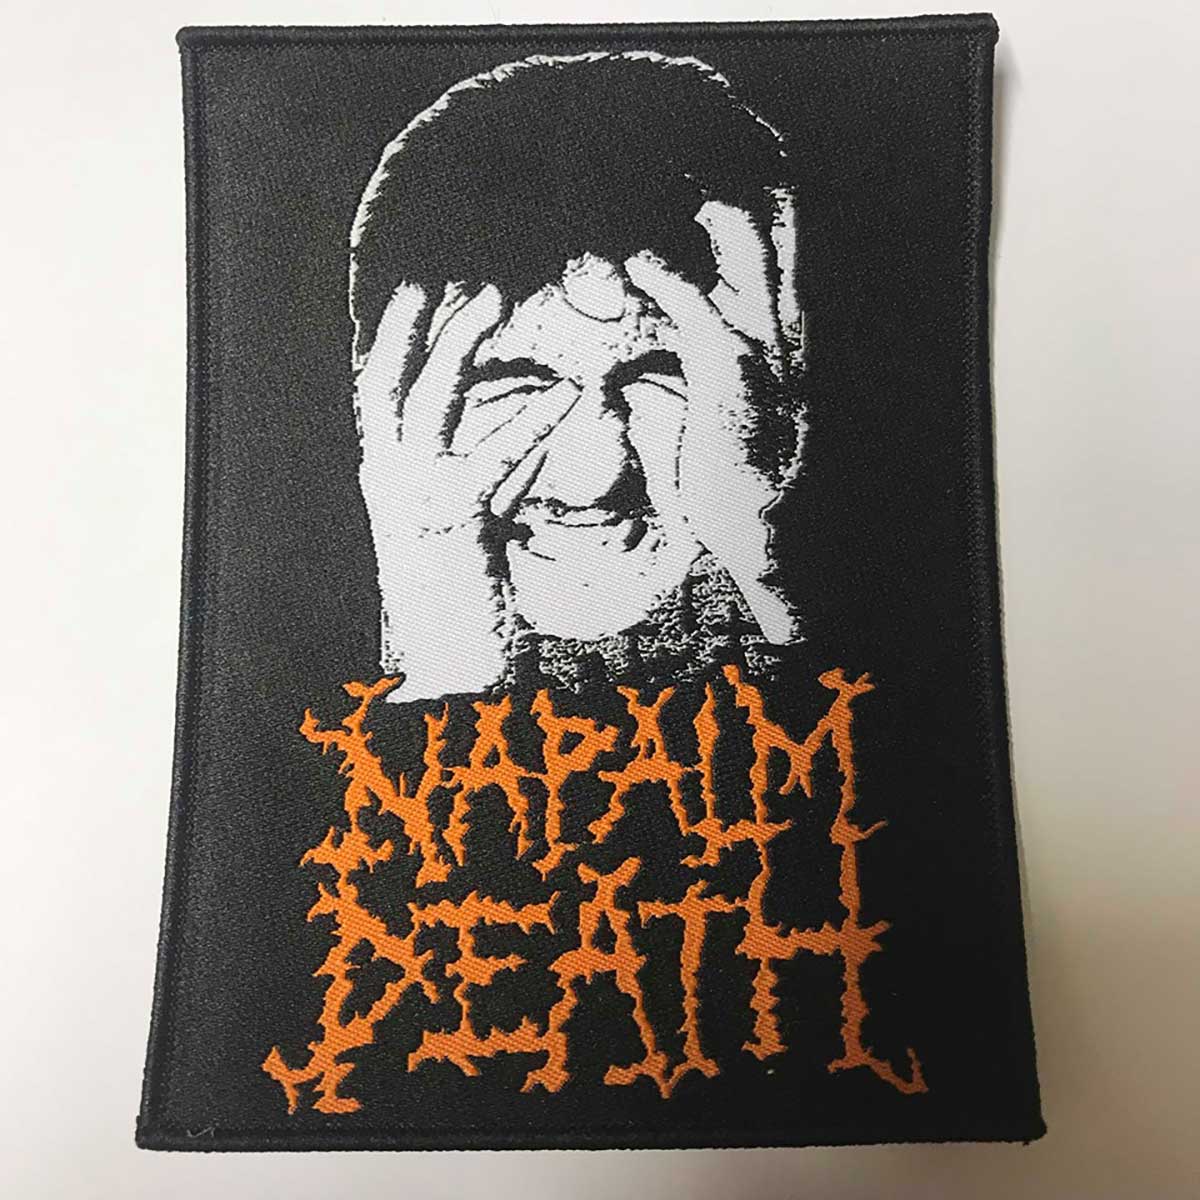 Napalm Death "From Enslavement To Obliteration" Woven Patch